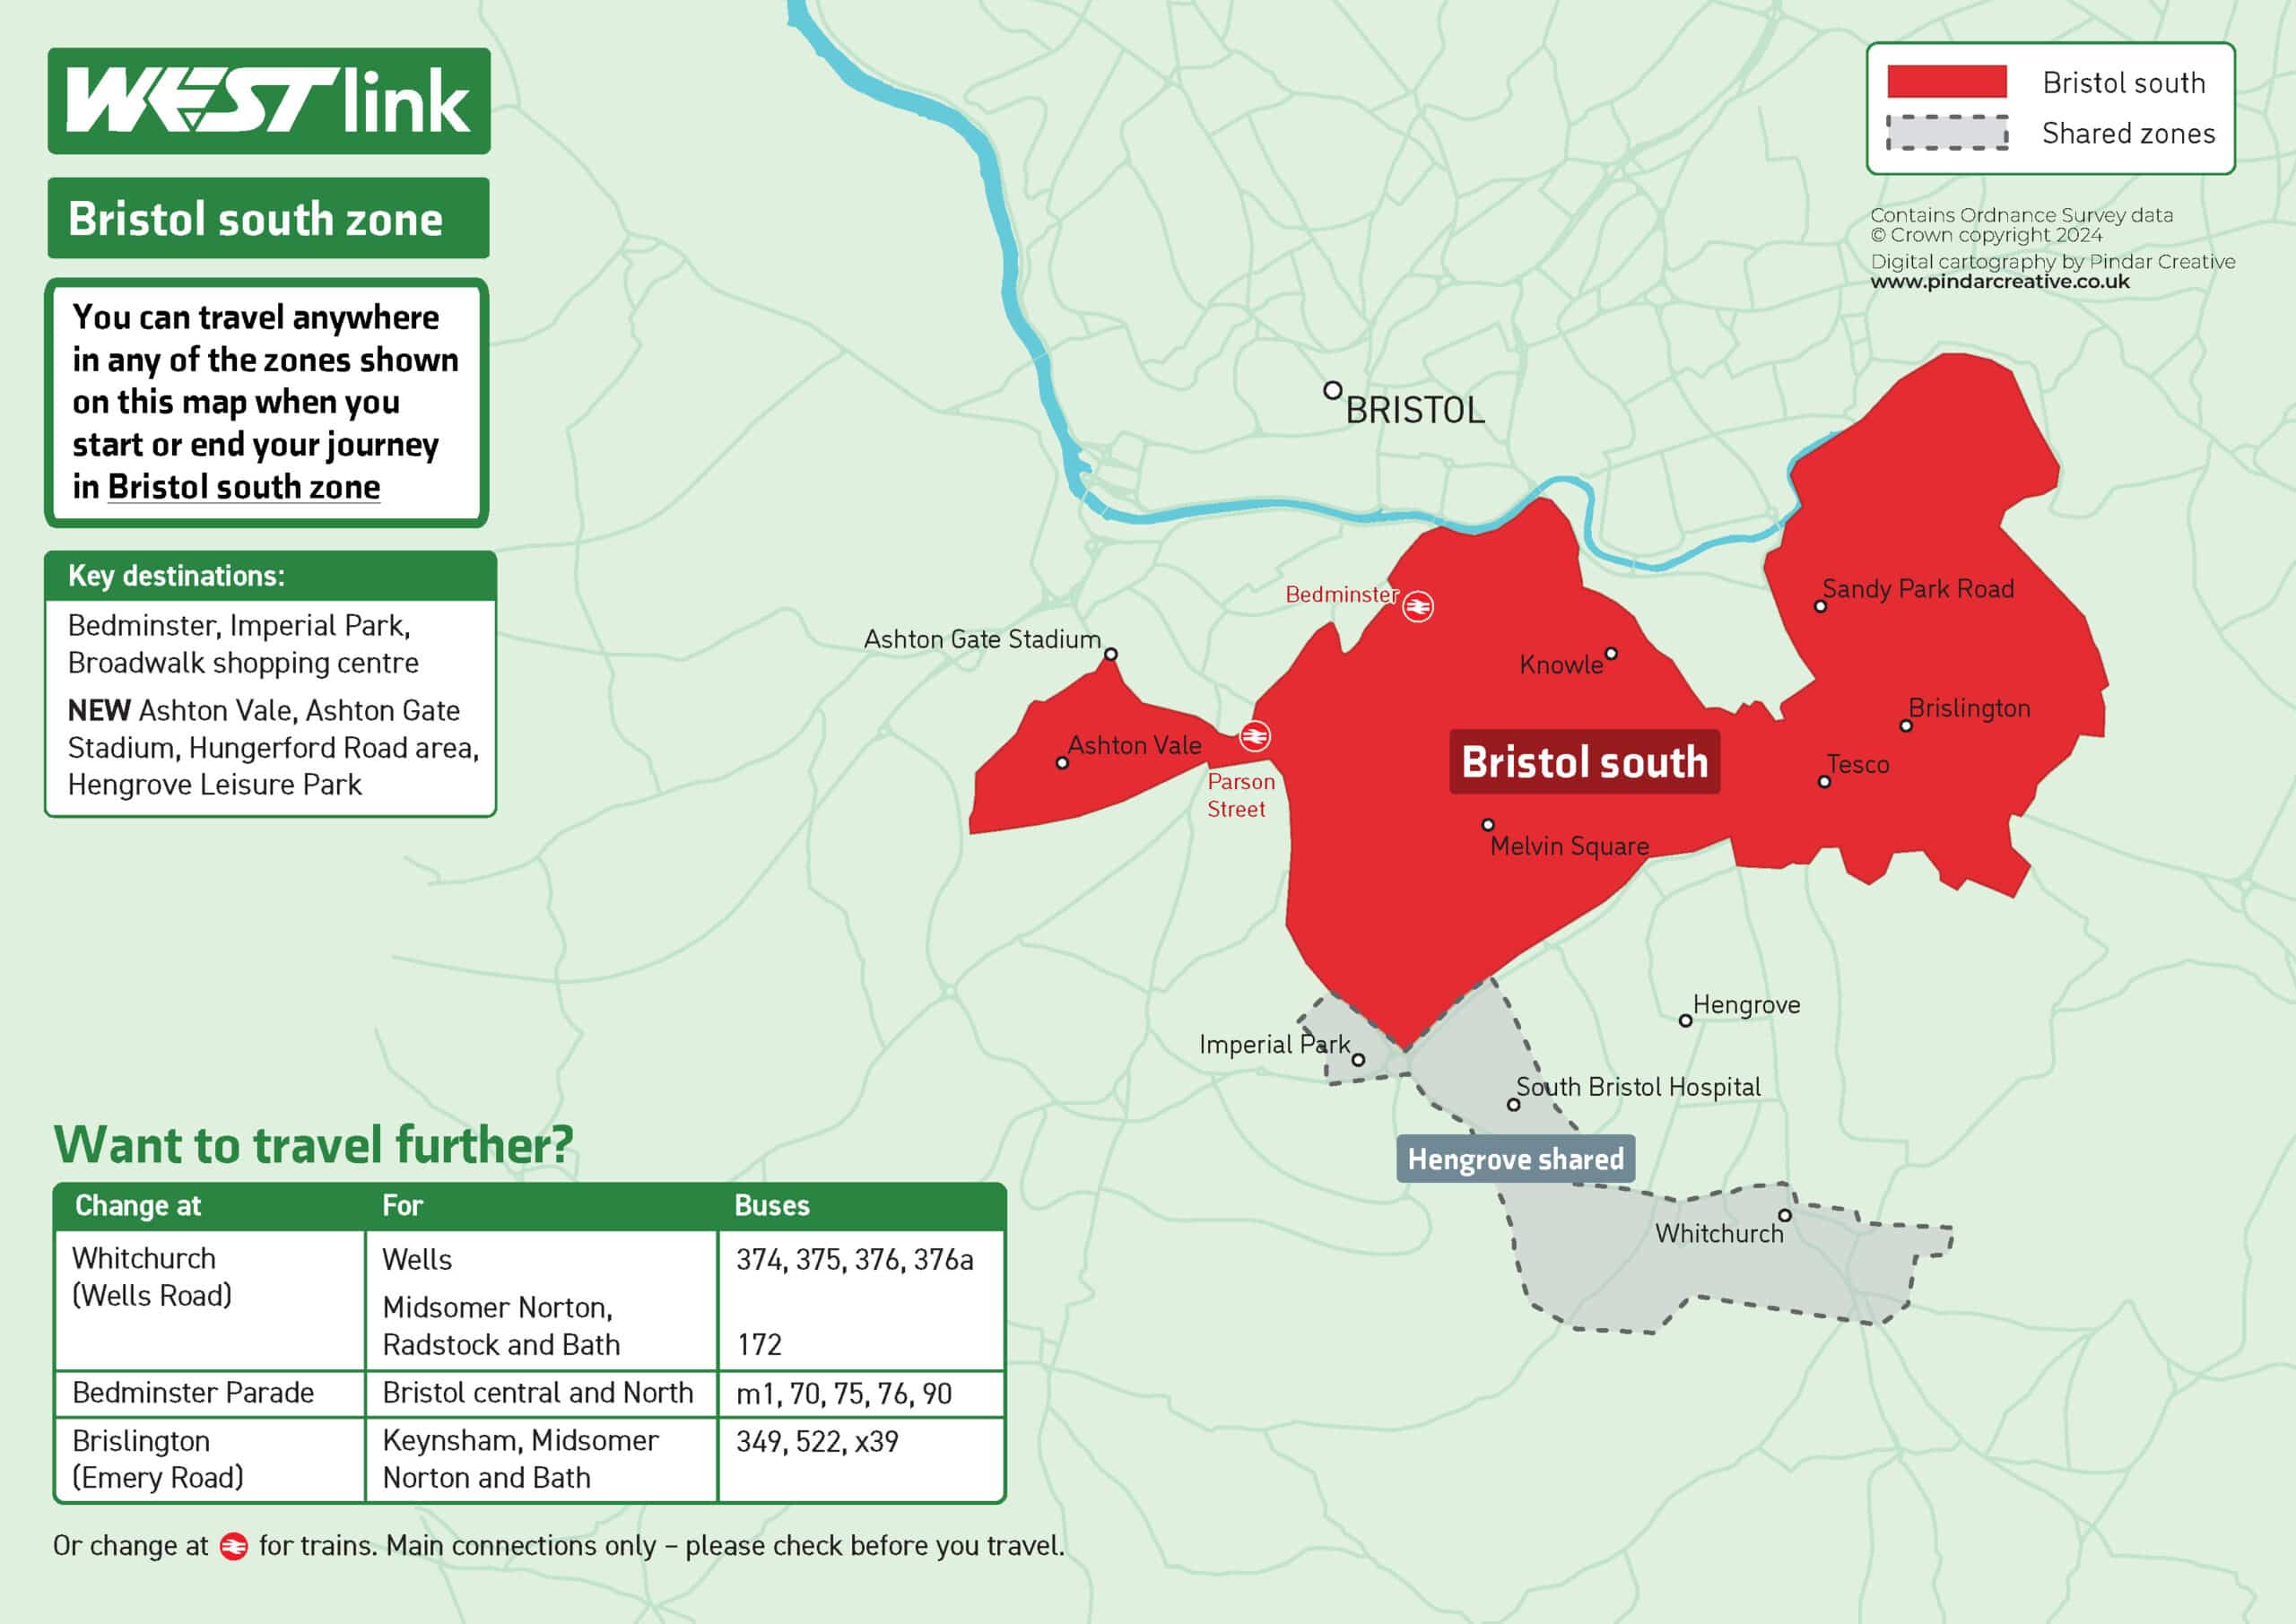 Bristol south zone map showing the boundaries and where you can travel. This information is also provided in an accessible version below.